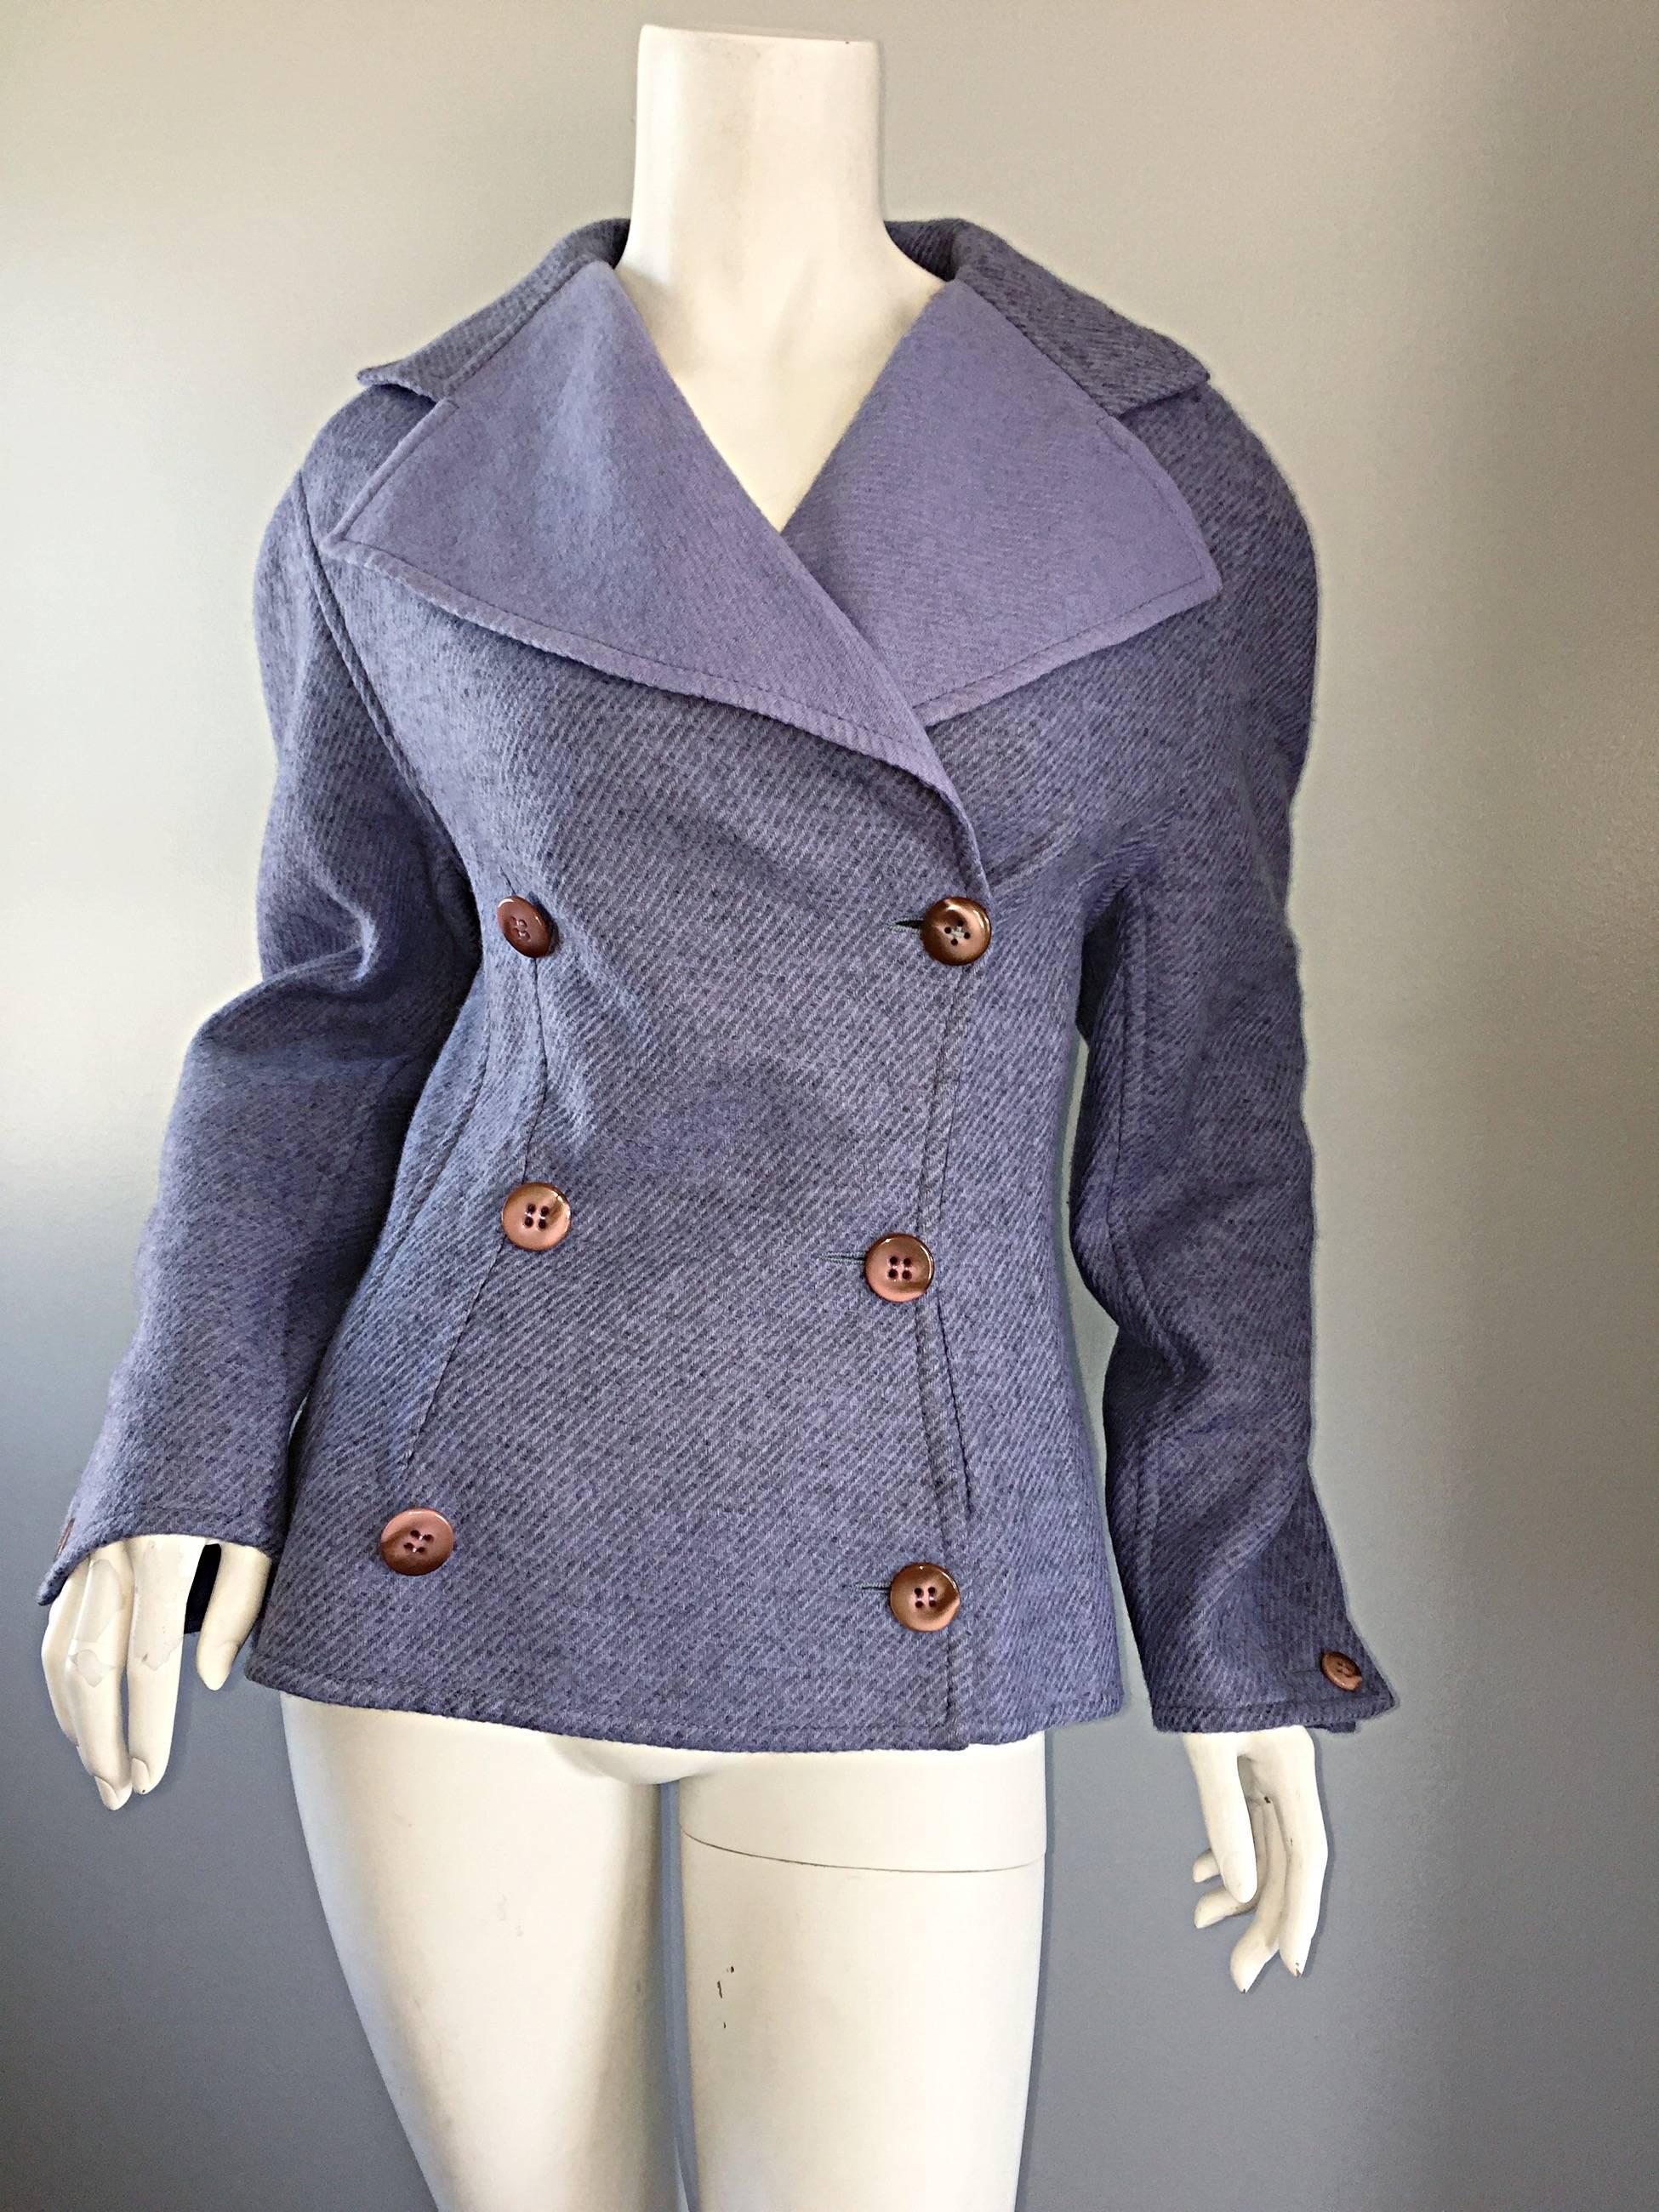 Beautiful vintage BERNARD PERRIS light purple / lavendar Lambswool double breasted Peacoat! Softest Lambswool that feels like cashmere. Features horn buttons up the bodice, with pockets at both sides of the waist. Oversized collar, with large lapels